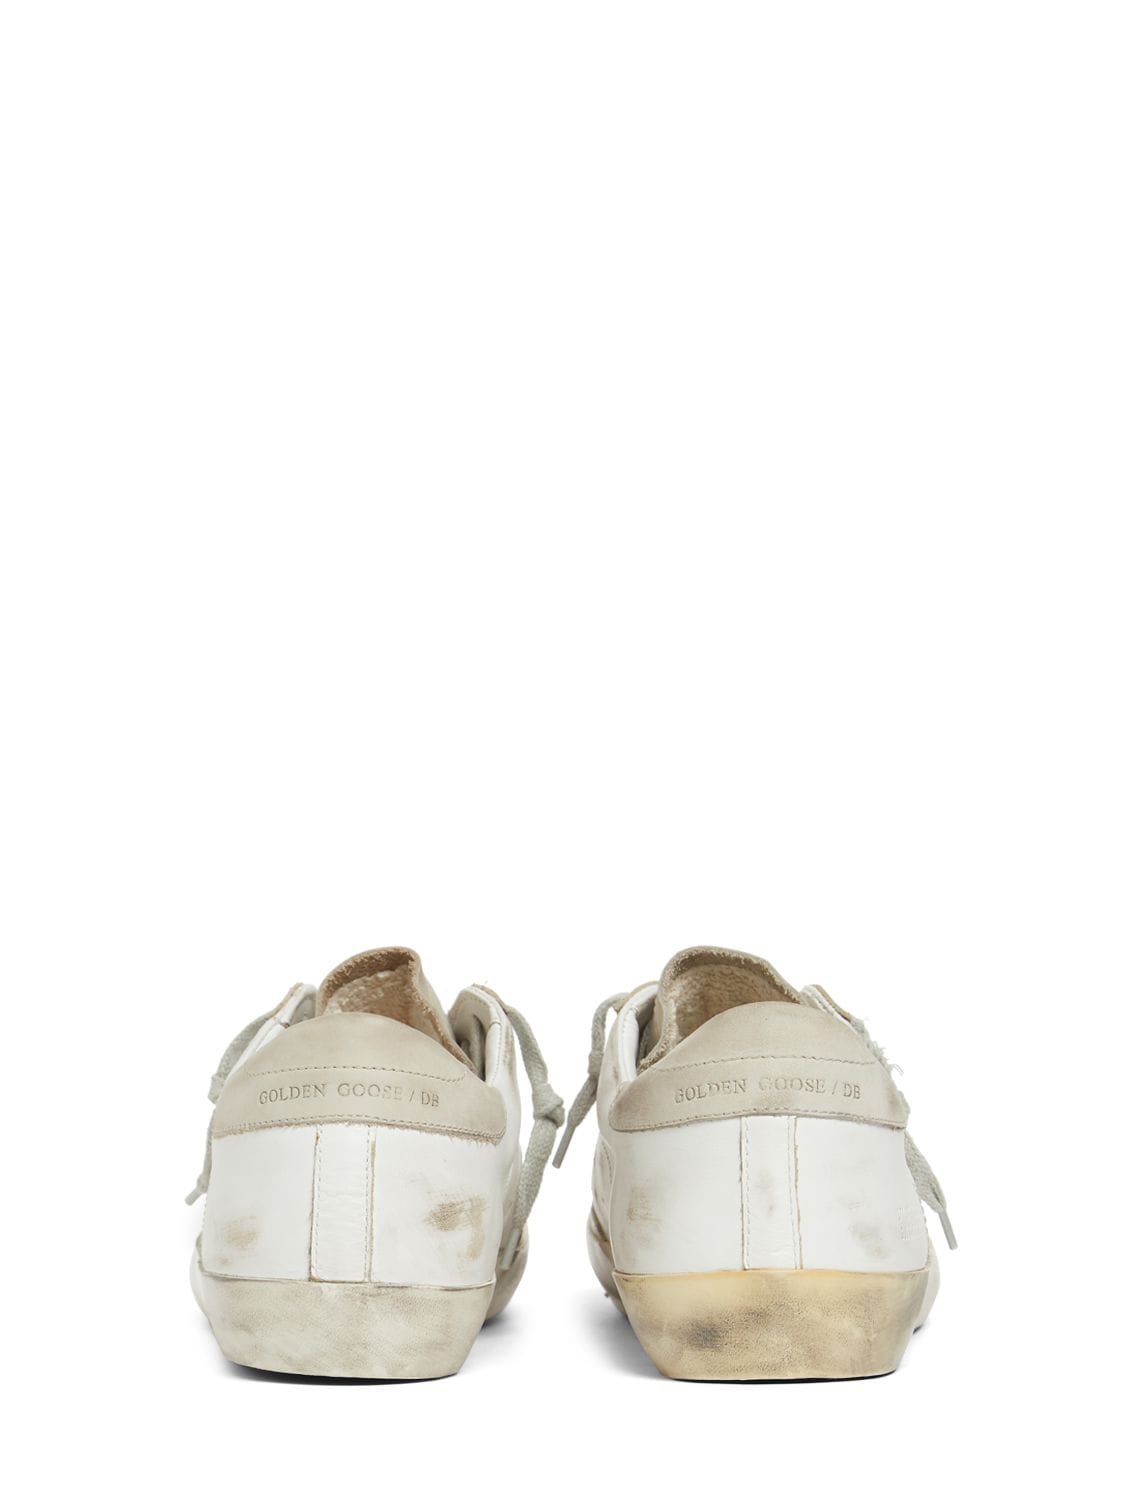 Shop Golden Goose 20mm Super Star Leather Sneakers In White,ice